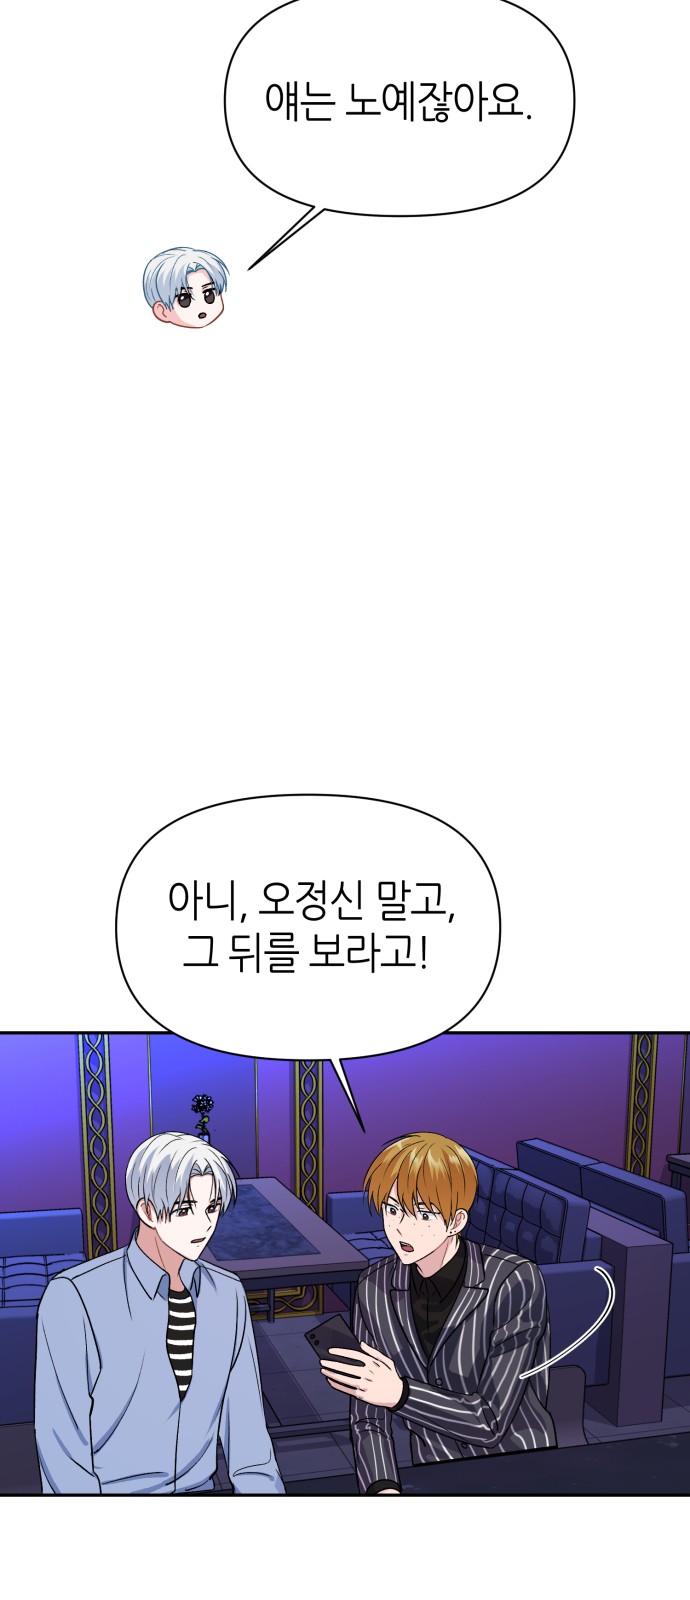 Holy Idol - Chapter 9 - Page 4